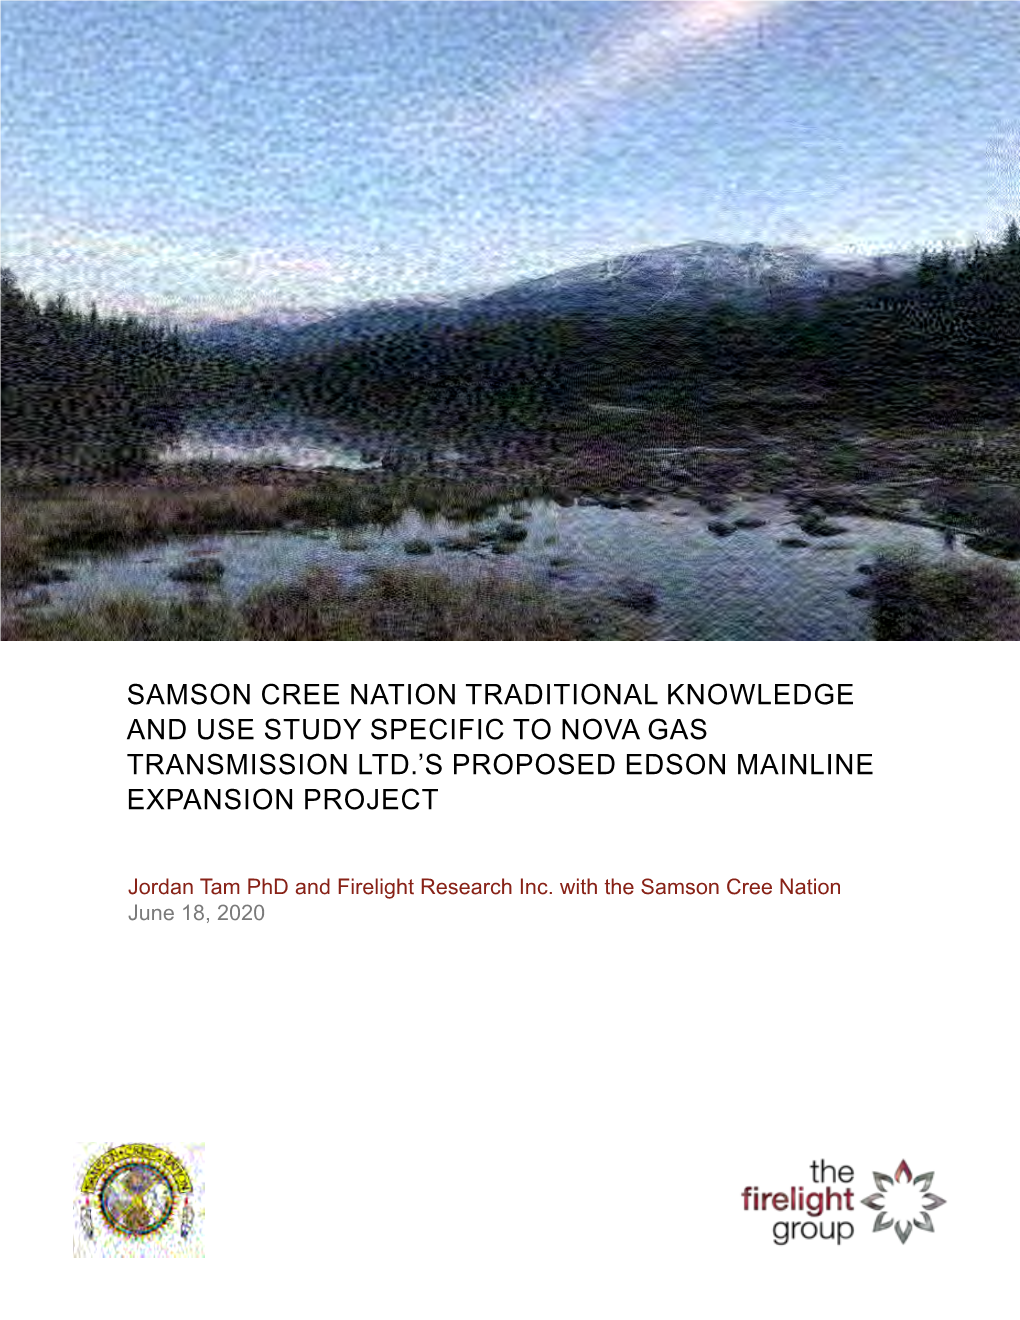 Samson Cree Nation Traditional Knowledge and Use Study Specific to Nova Gas Transmission Ltd.’S Proposed Edson Mainline Expansion Project